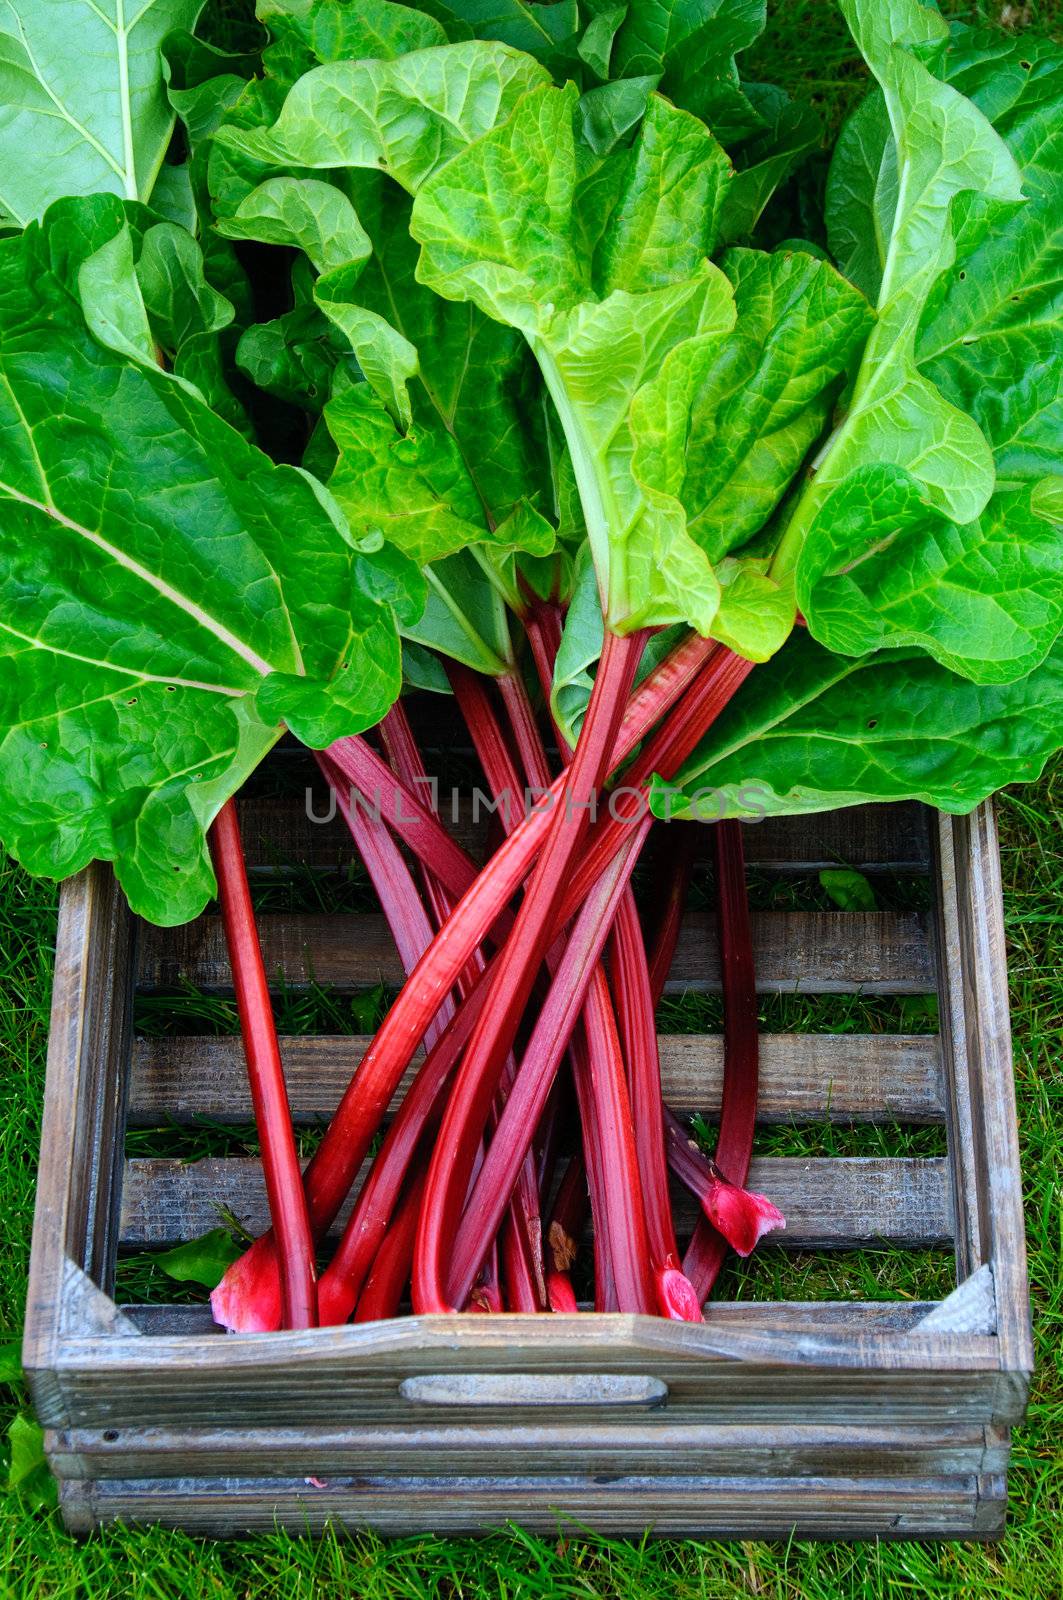 A wooden box with newly cut rhubarb from the garden